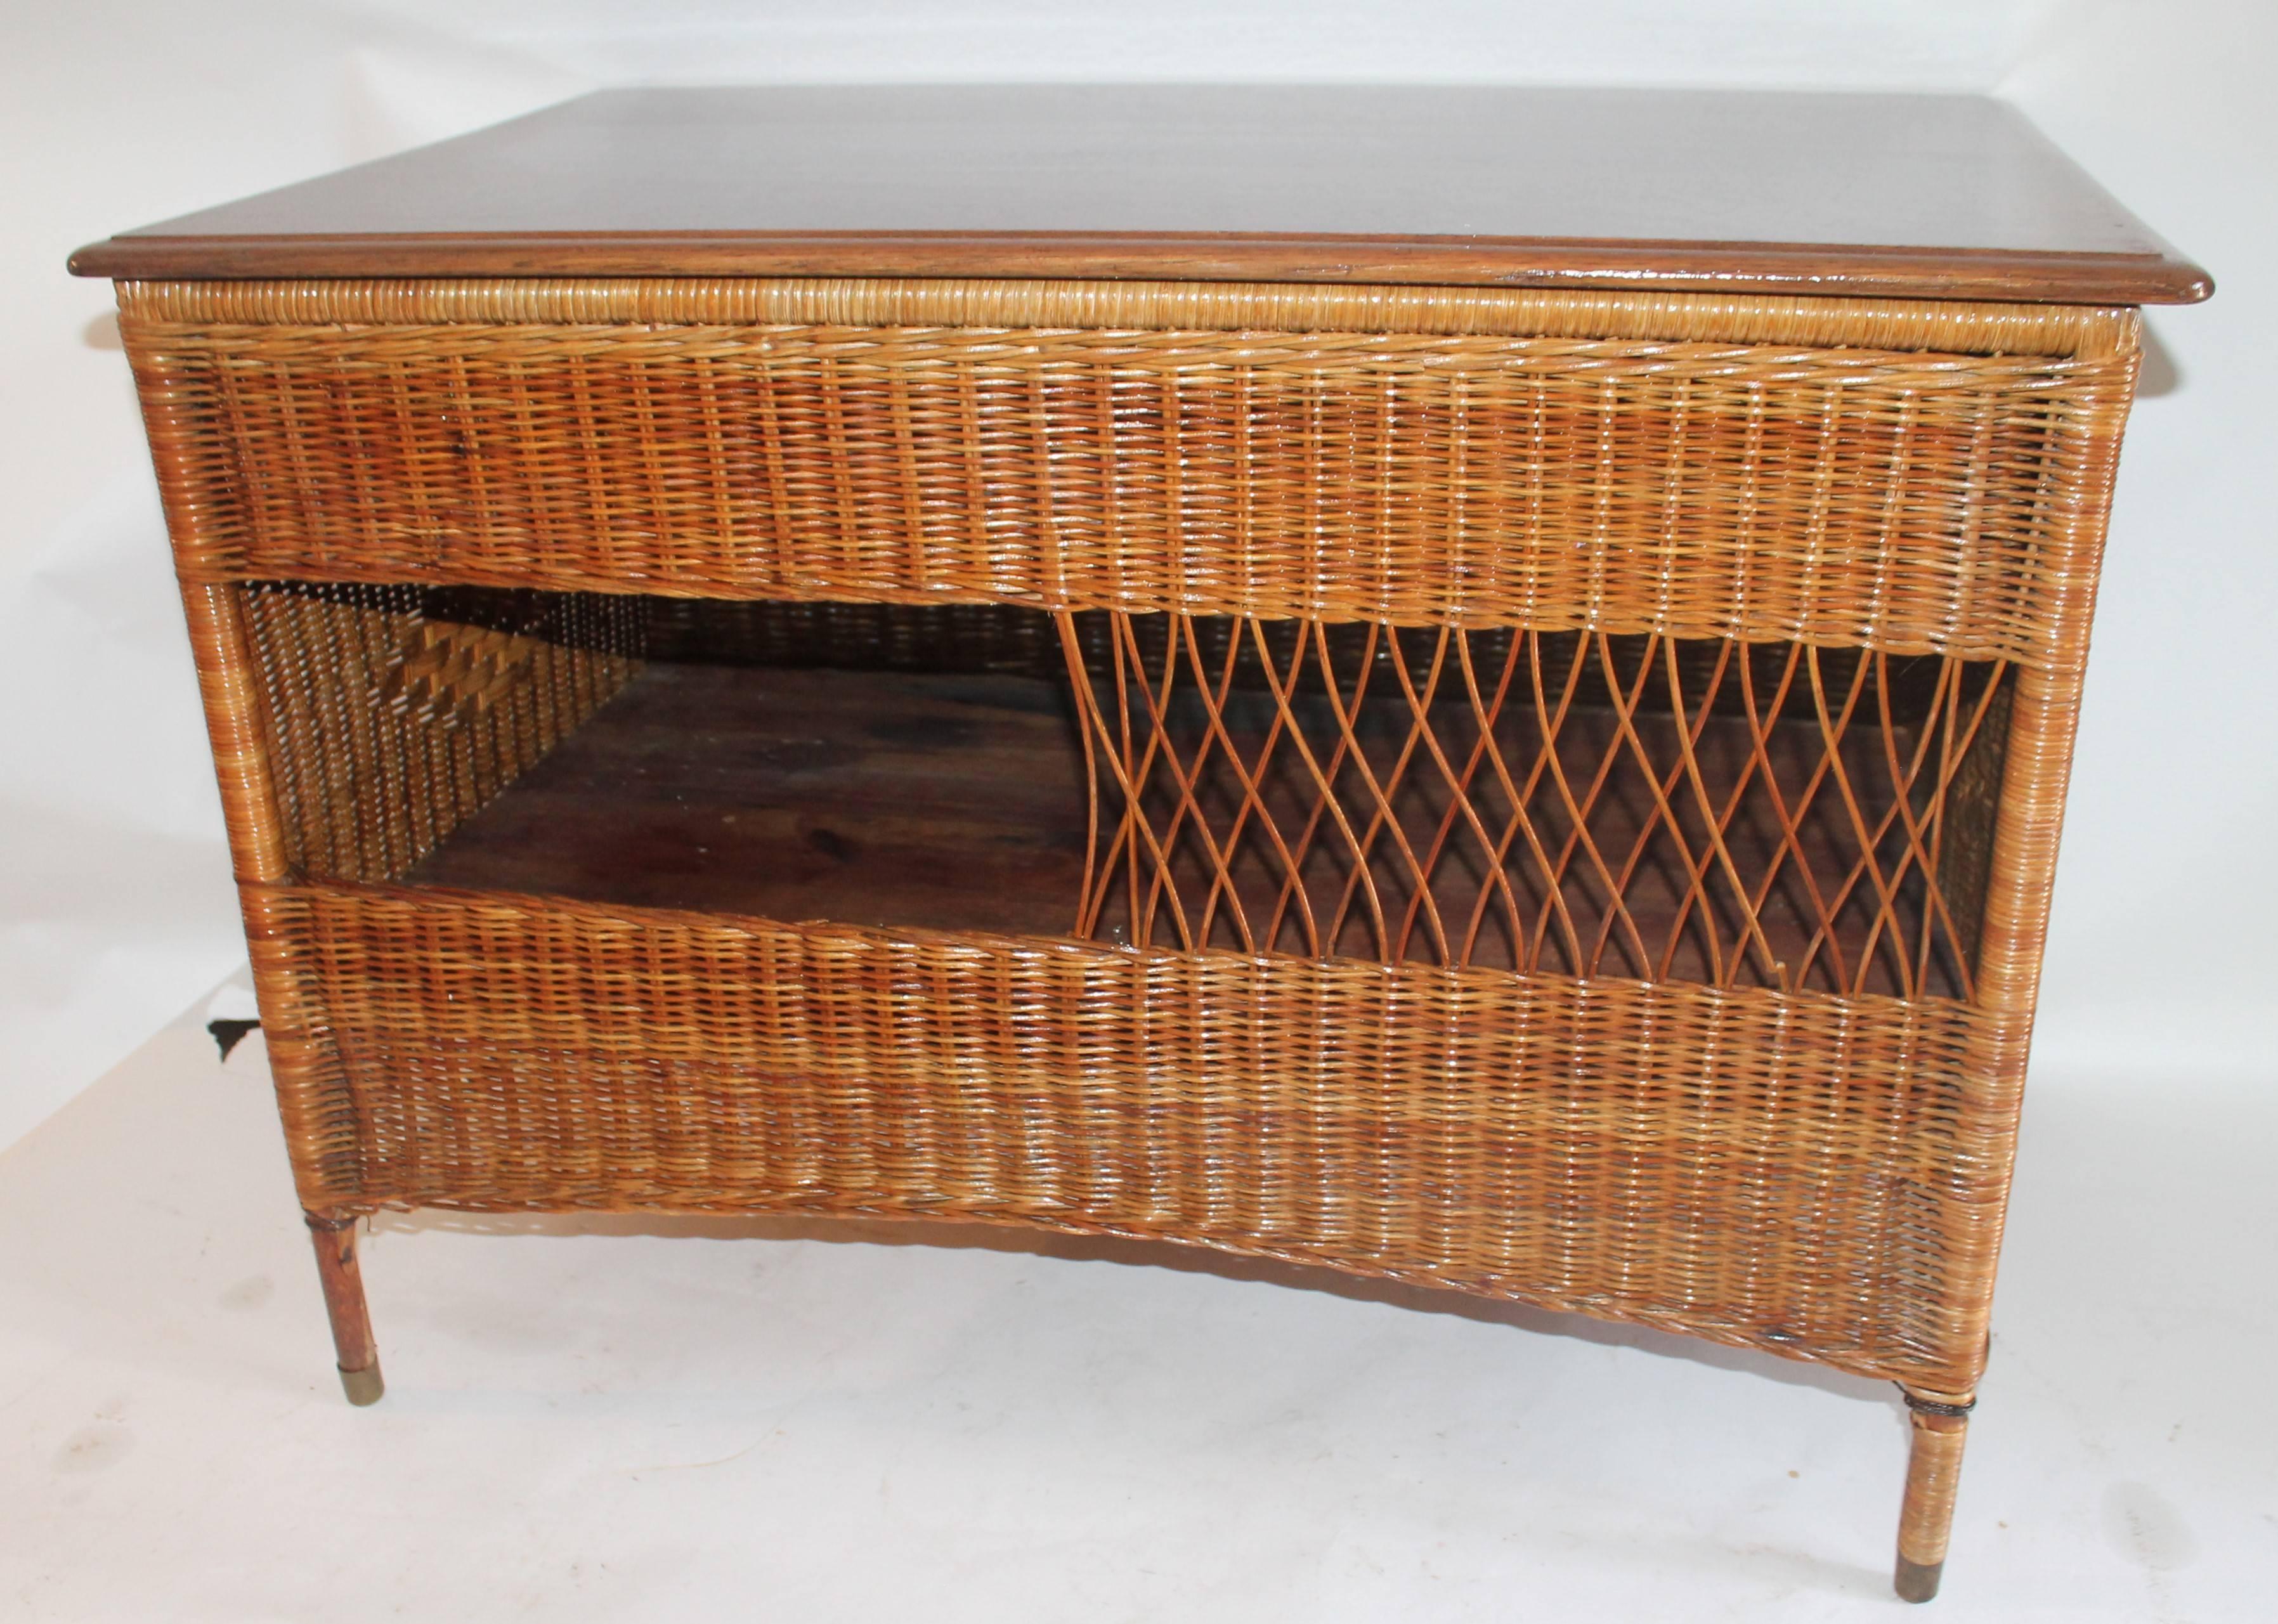 This most unusual wicker work table with a oak lift top in fine condition. Not sure if it was a work or counter table in a sewing store. Bar Harbor style but unsigned. With a natural stain and varnish surface.